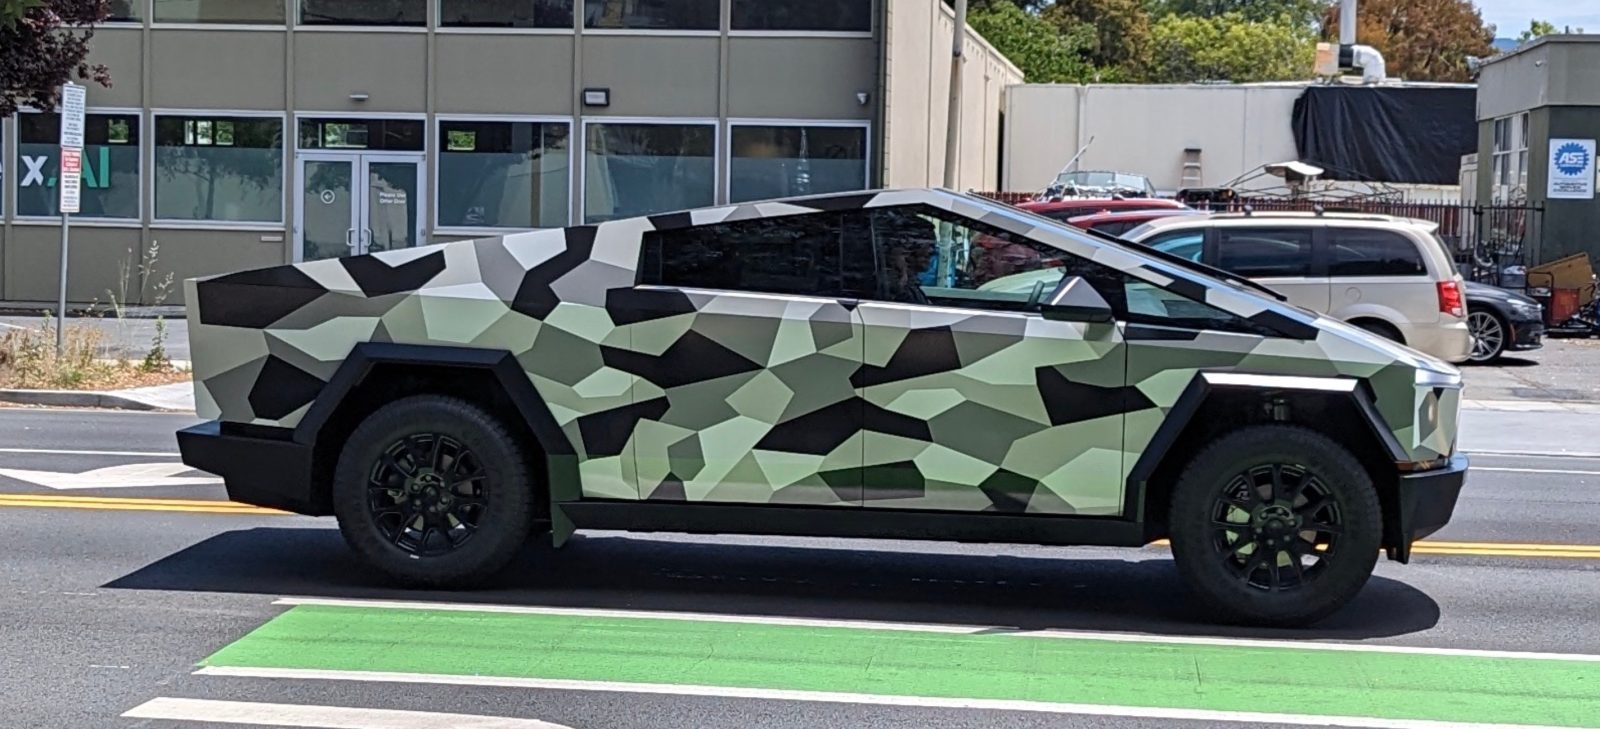 tesla-cybertruck-spotted-with-camouflage-starts-rumors-greenway-report